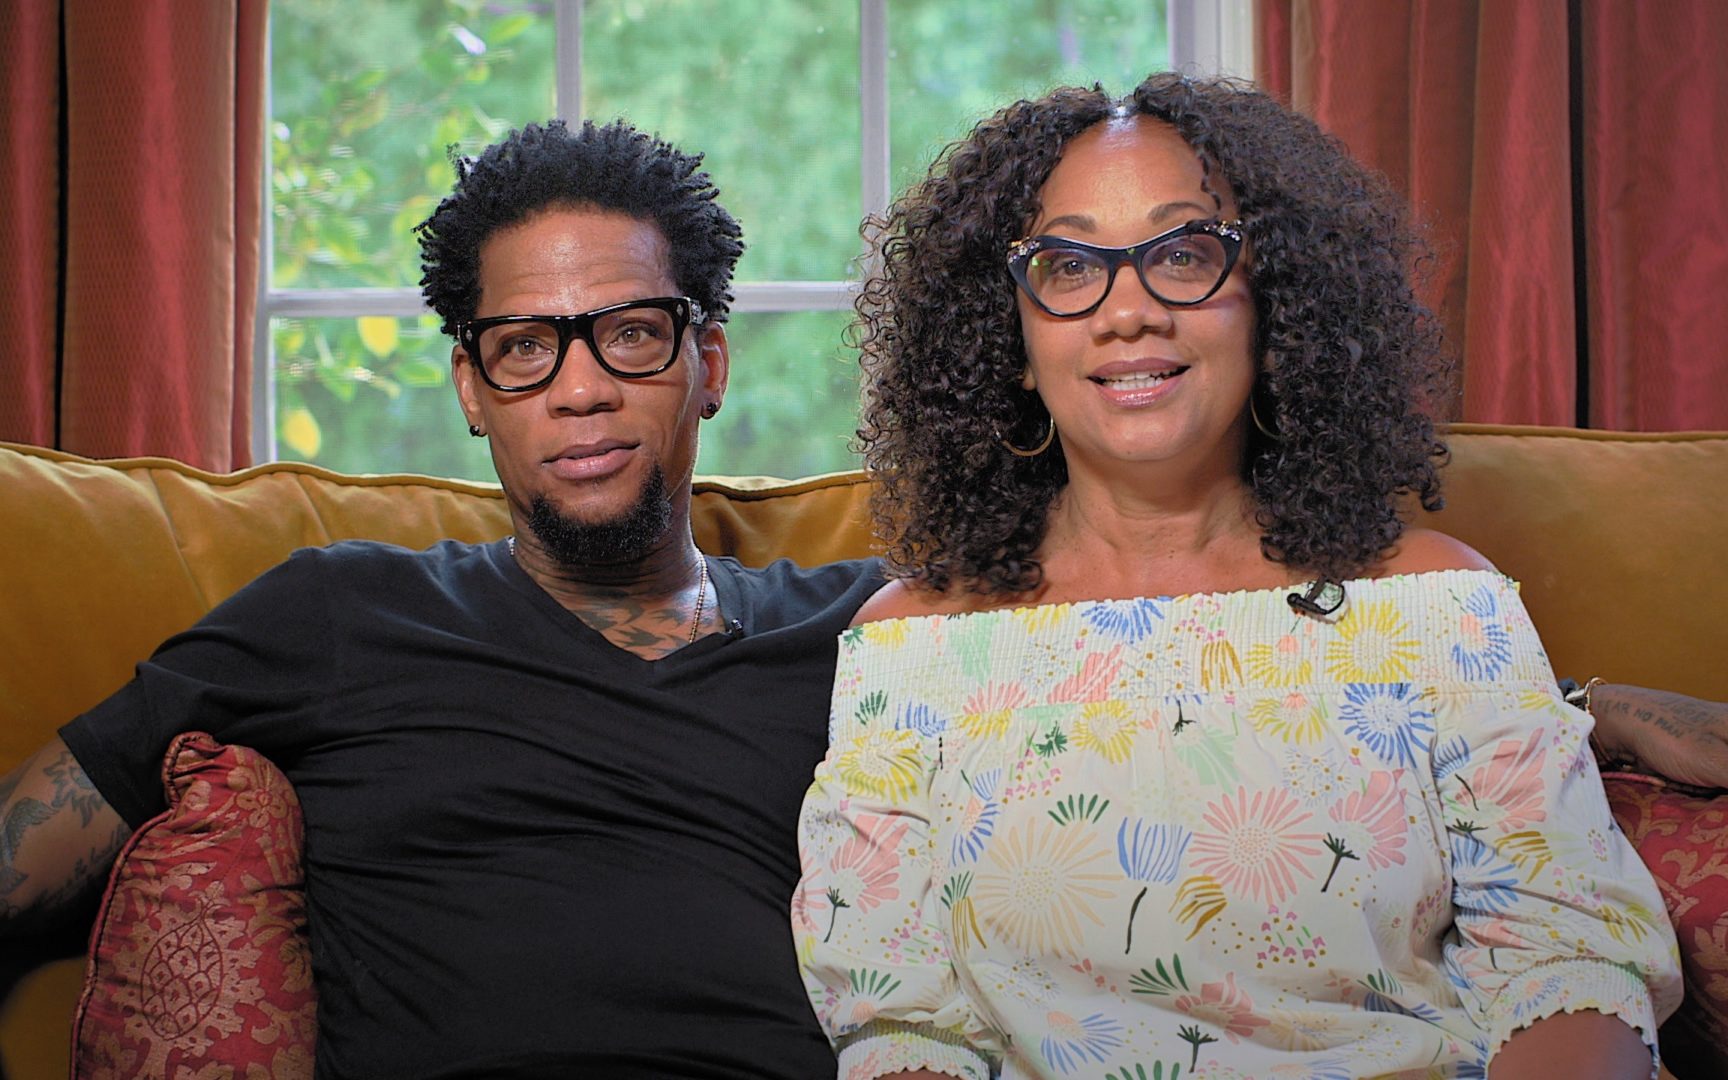 DL Hughley and his wife talk about his multiple affairs with other women